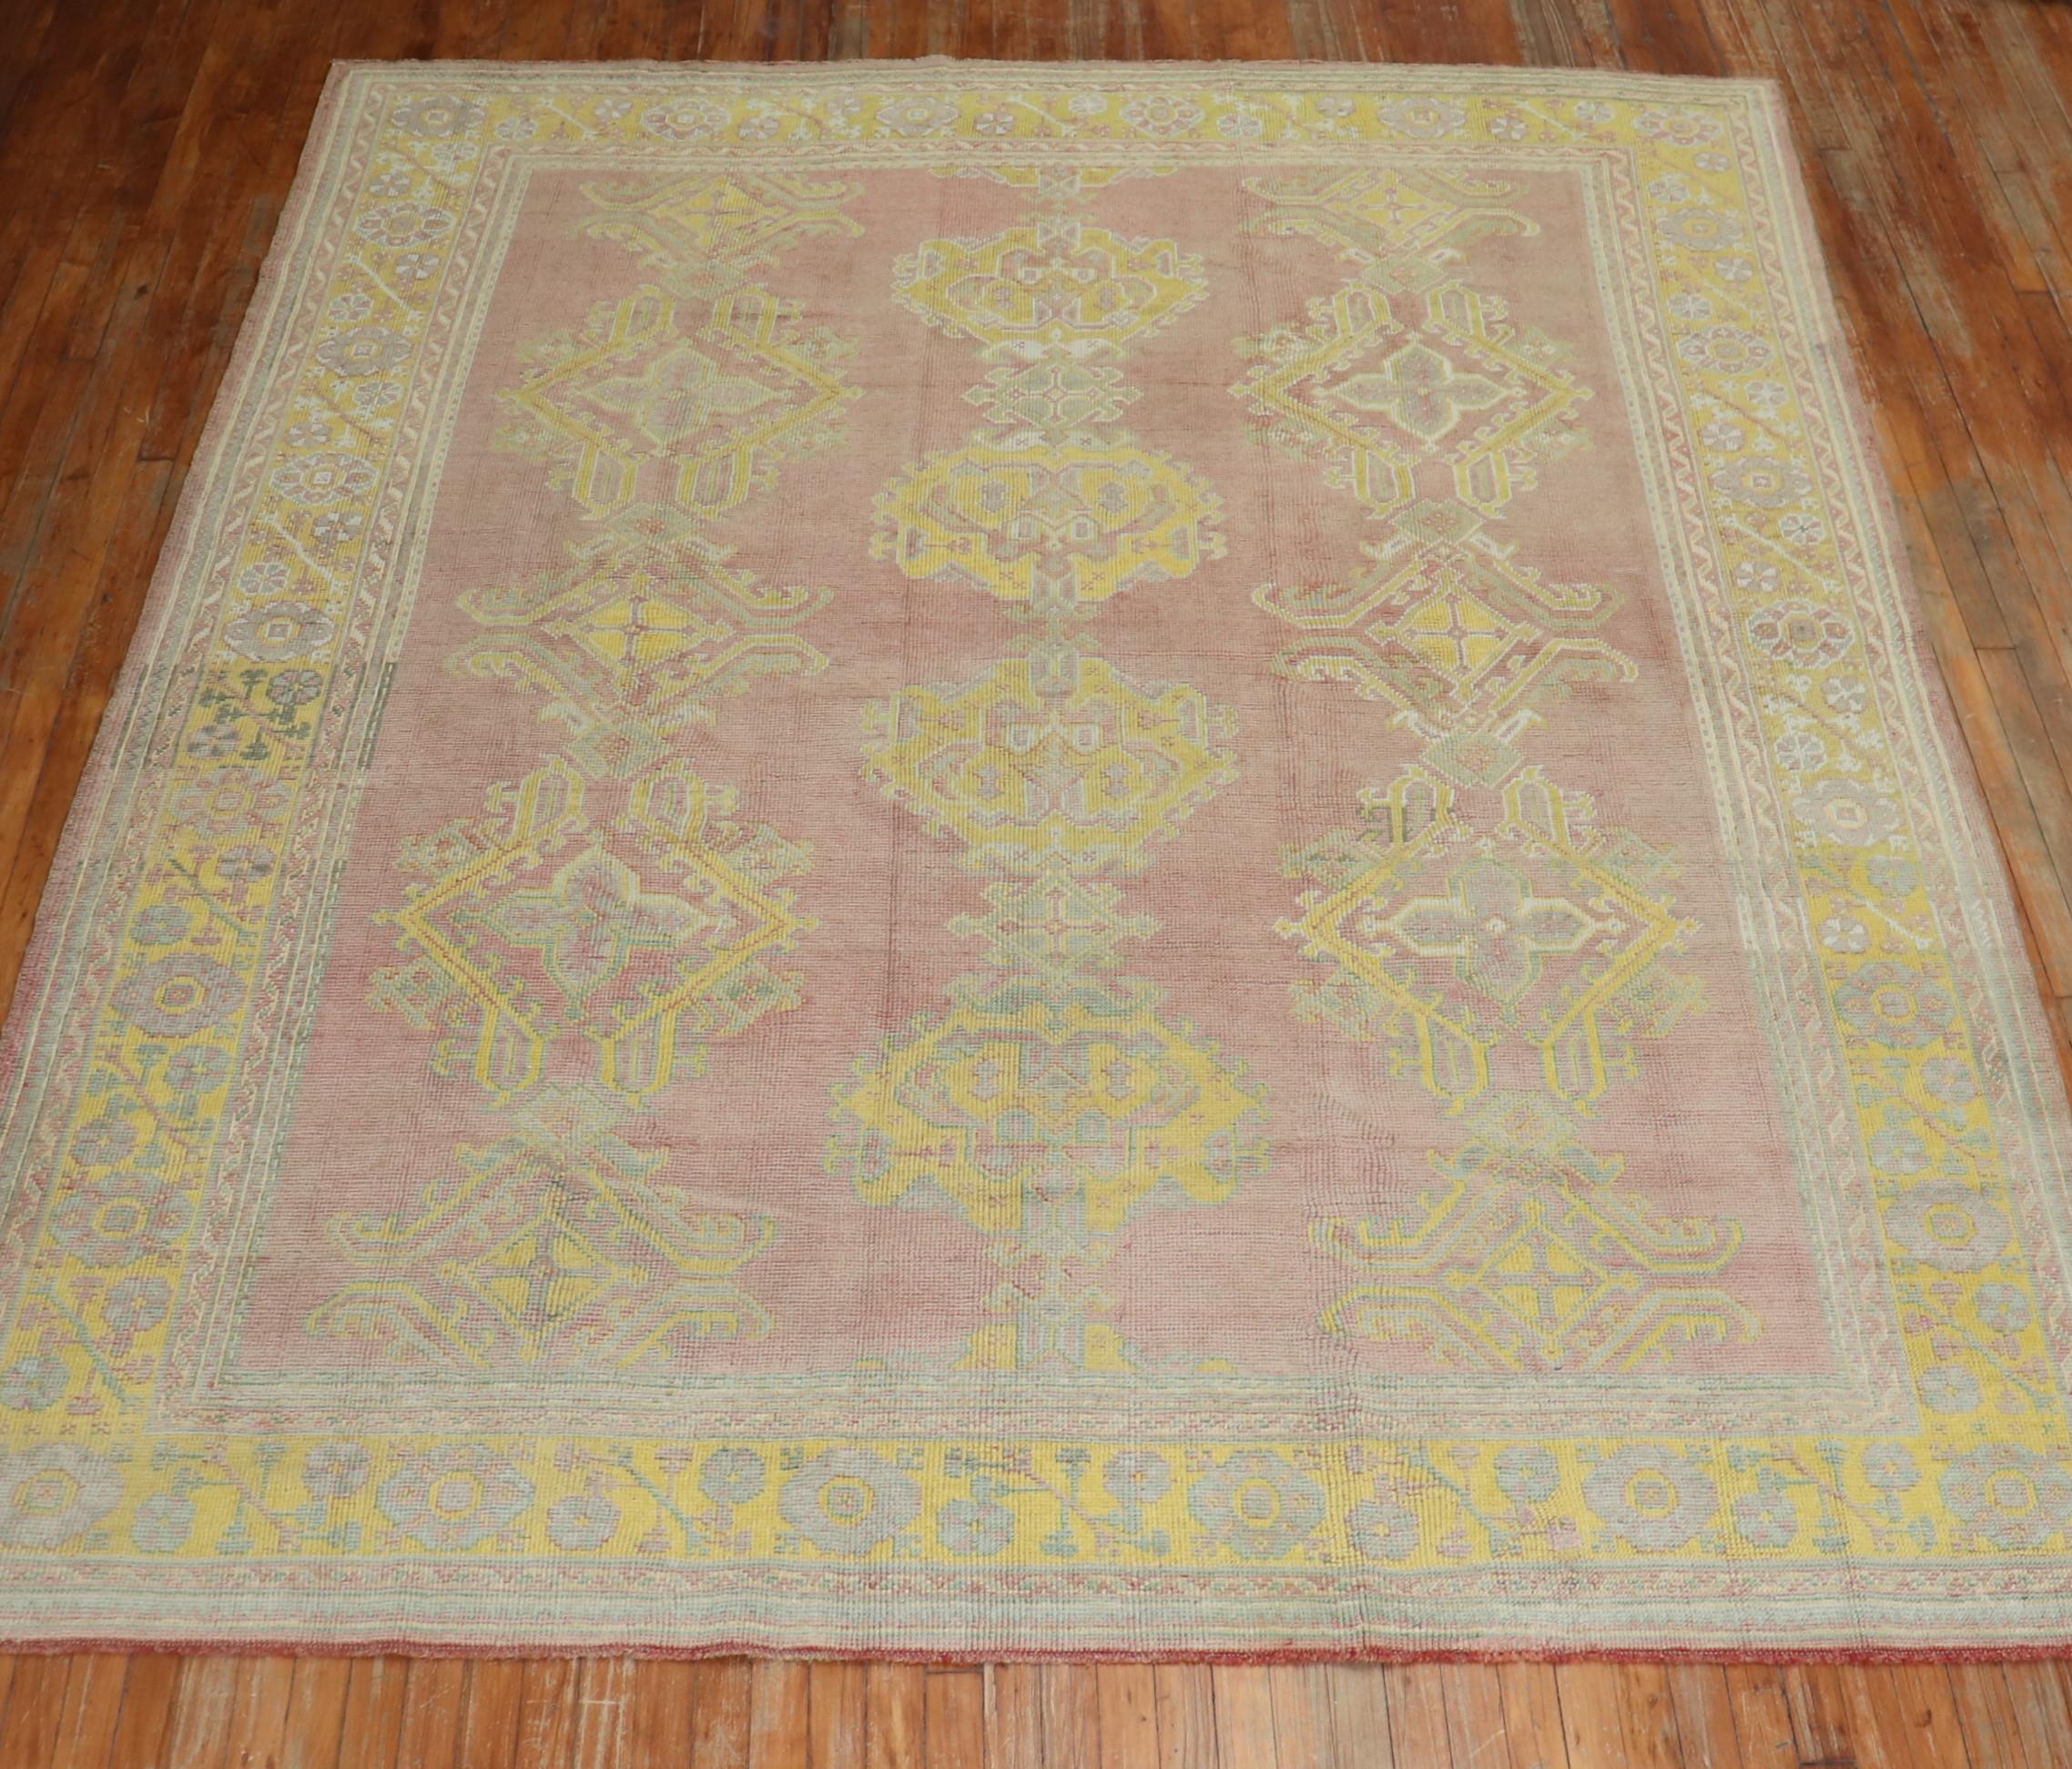 An early 20th century Turkish Oushak with an all over geometric design on aa rose field. The border is a bright yellow. Accents in bright yellow , light green and gray

Measures: 8'2